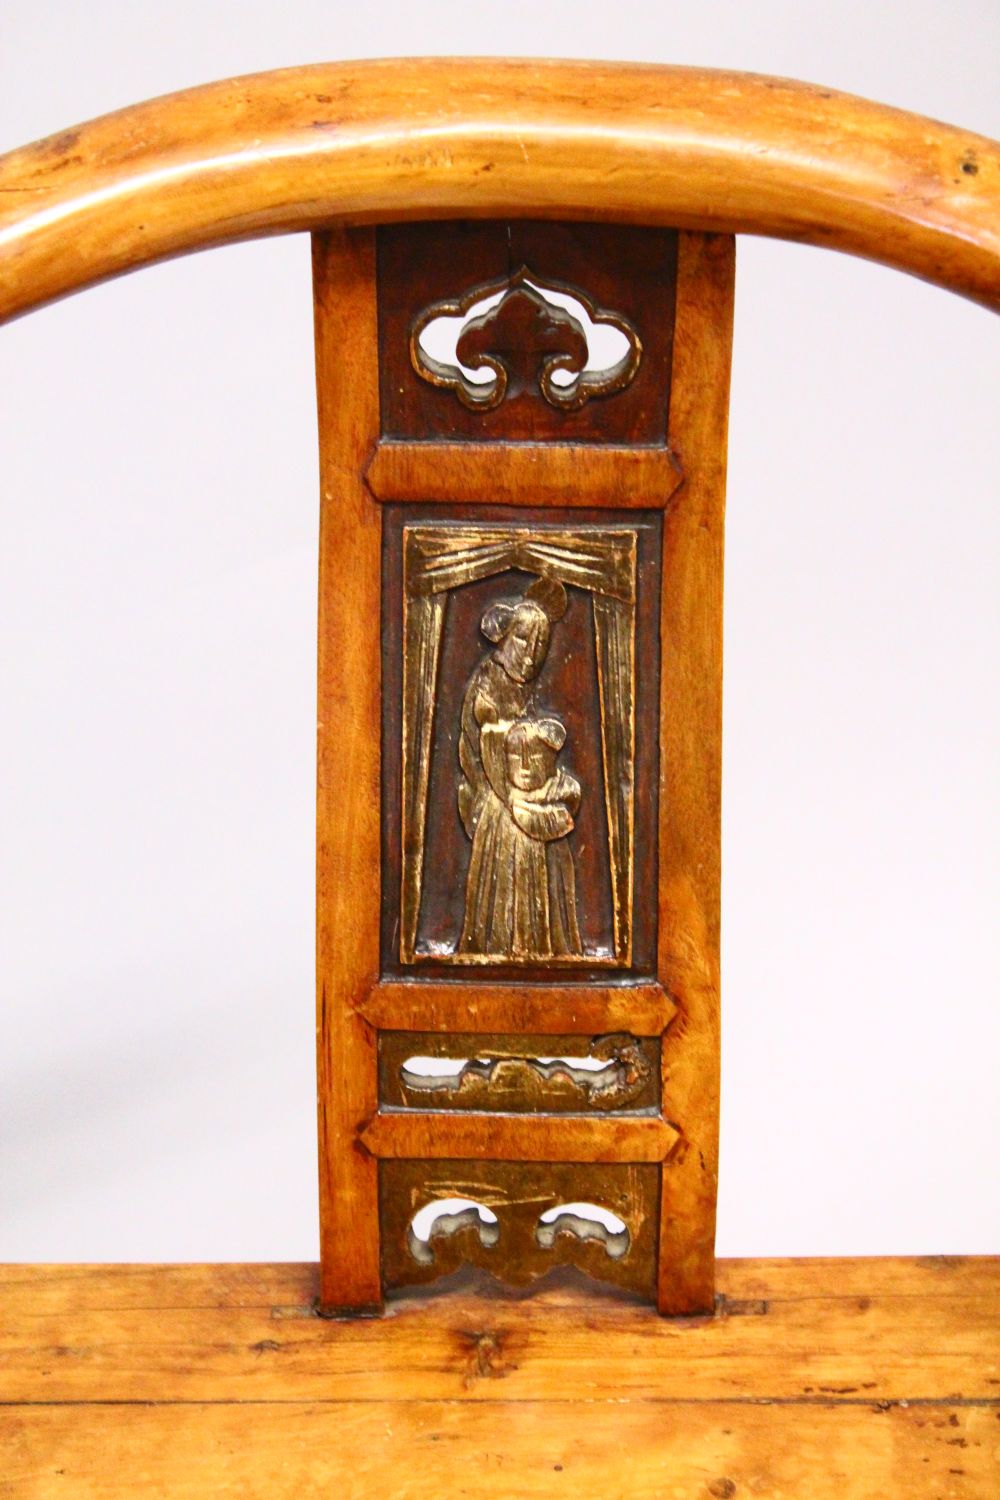 A CHINESE CARVED WOOD HOOP BACK ARM CHAIR, the back panel carved with a figure and openwork with - Image 2 of 2